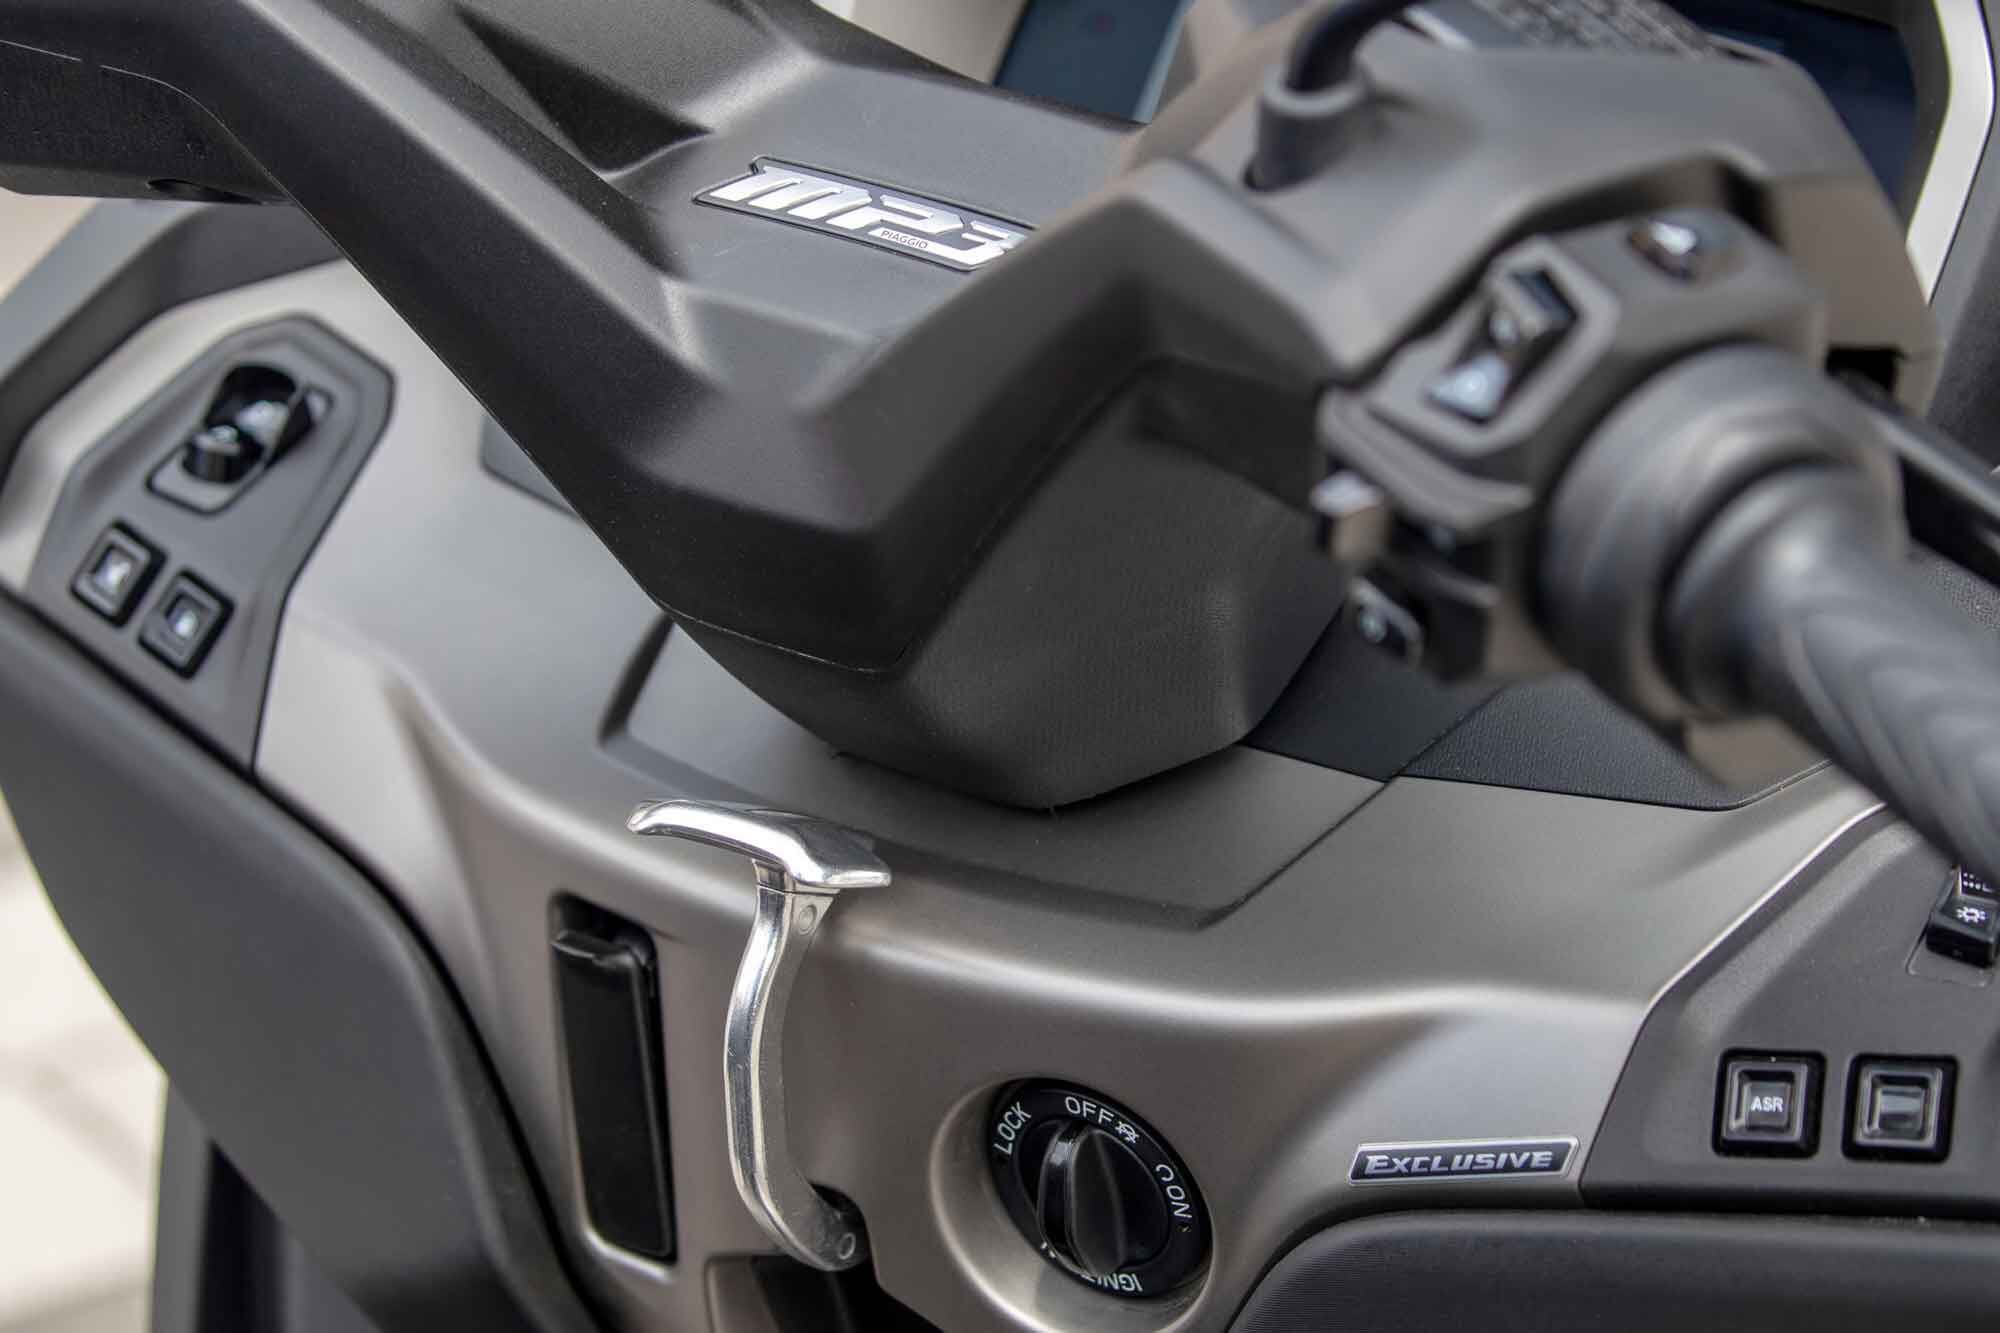 The silver lever in the center is part of the MP3′s parking brake system, a necessity due to the no-shift CVT transmission.